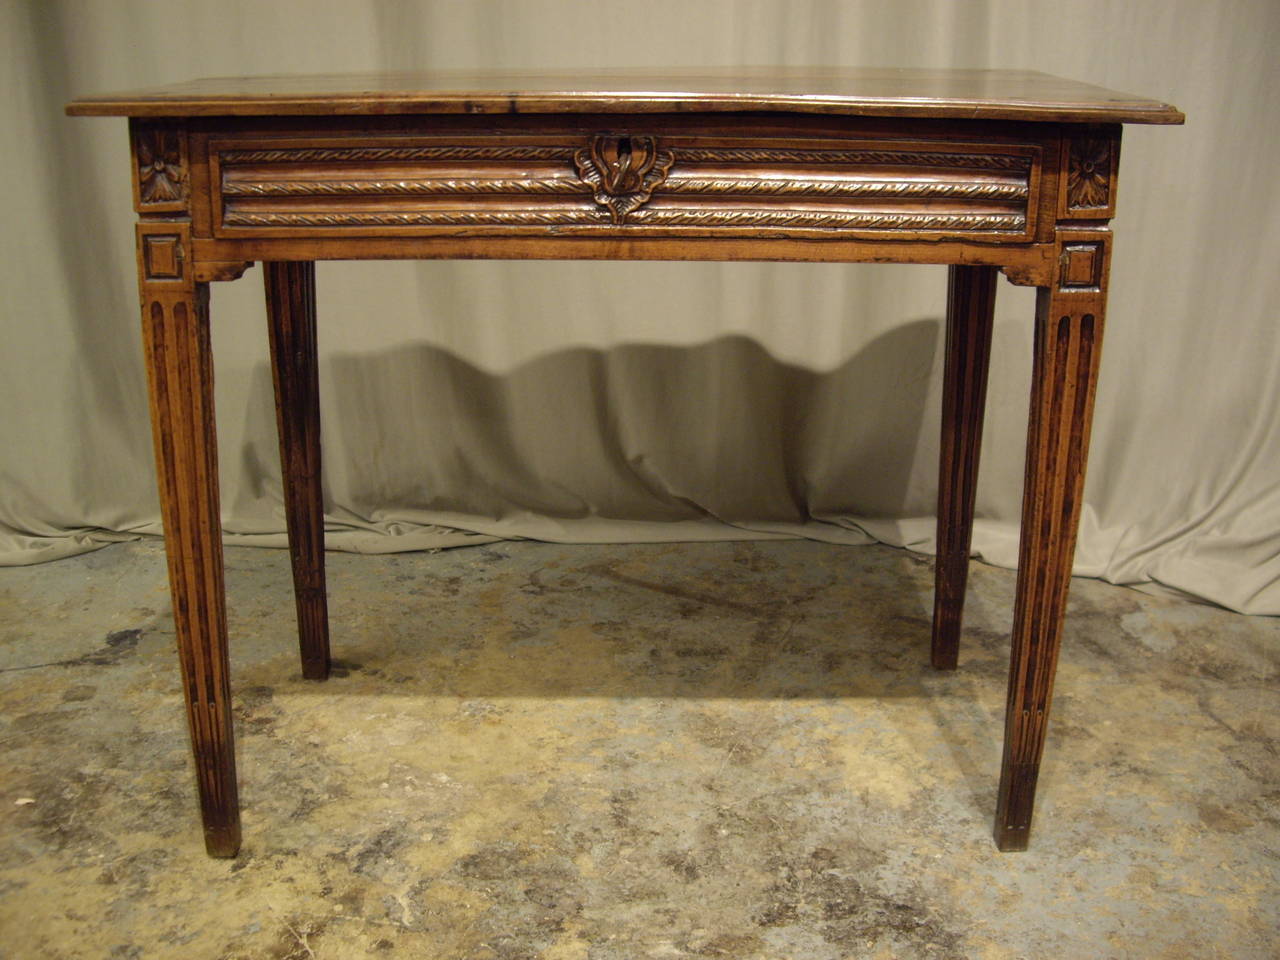 Early 19th century walnut Louis XVI side table with a lovely warm patina. It has been carefully restored and French polished.